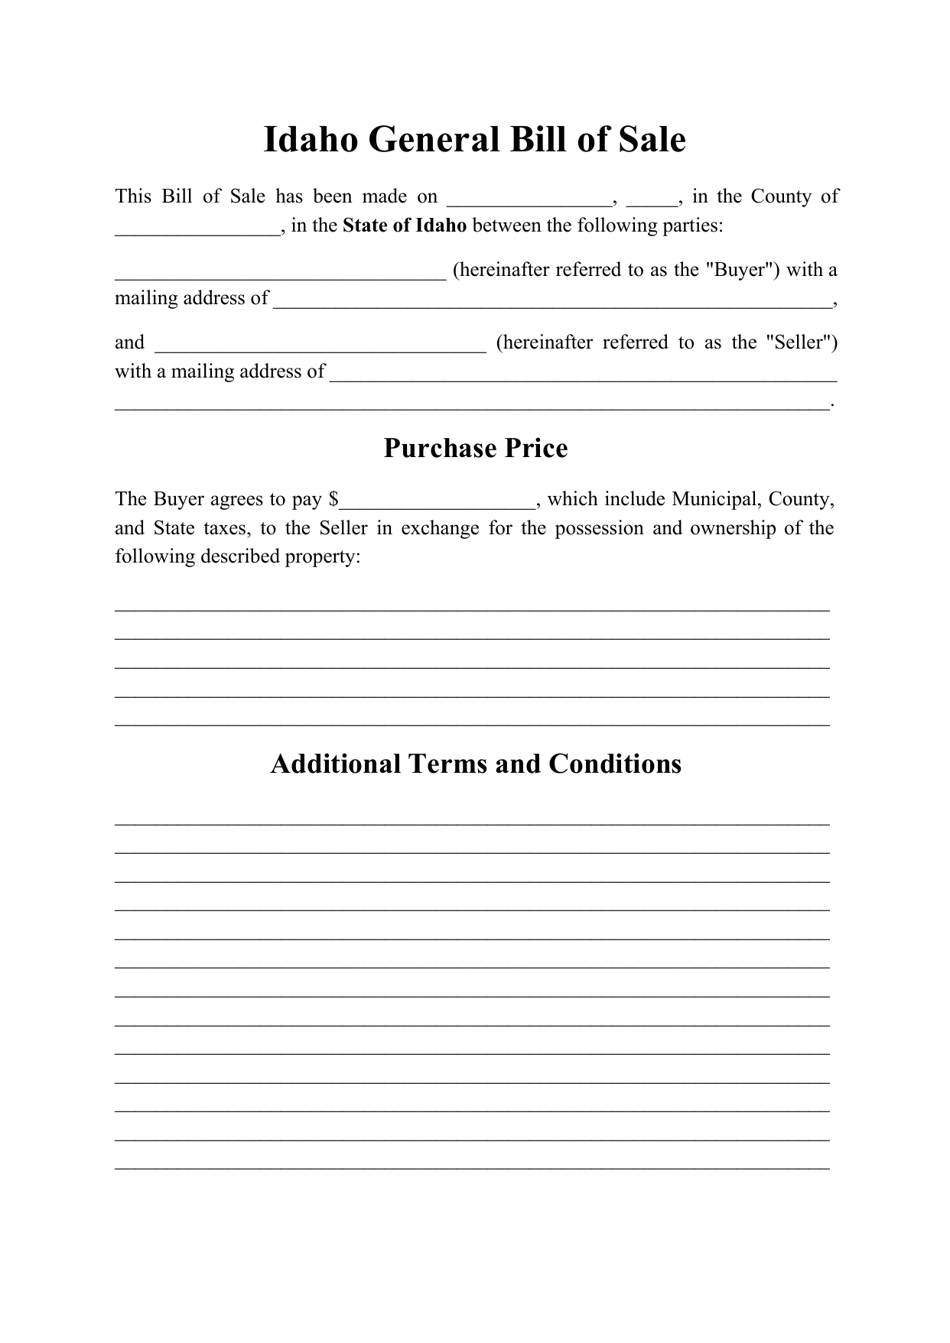 Idaho Generic Bill of Sale Form Download Printable PDF | Templateroller